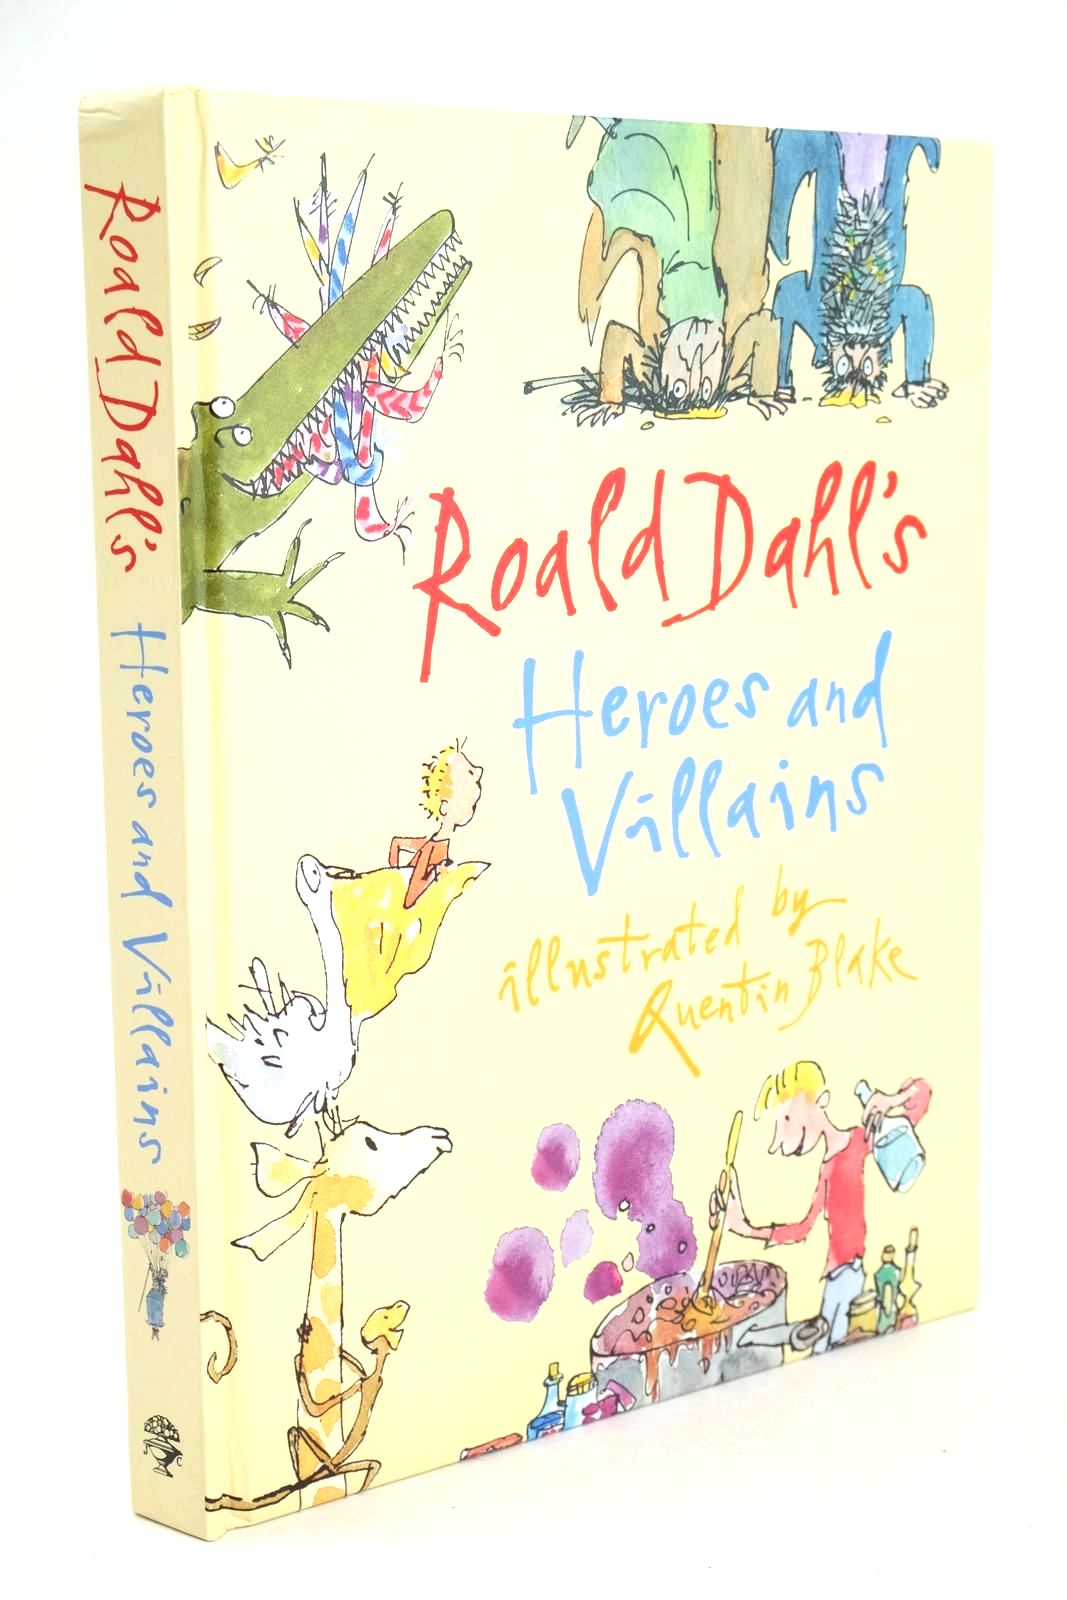 Photo of ROALD DAHL'S HEROES AND VILLAINS written by Dahl, Roald illustrated by Blake, Quentin published by Jonathan Cape (STOCK CODE: 1326219)  for sale by Stella & Rose's Books